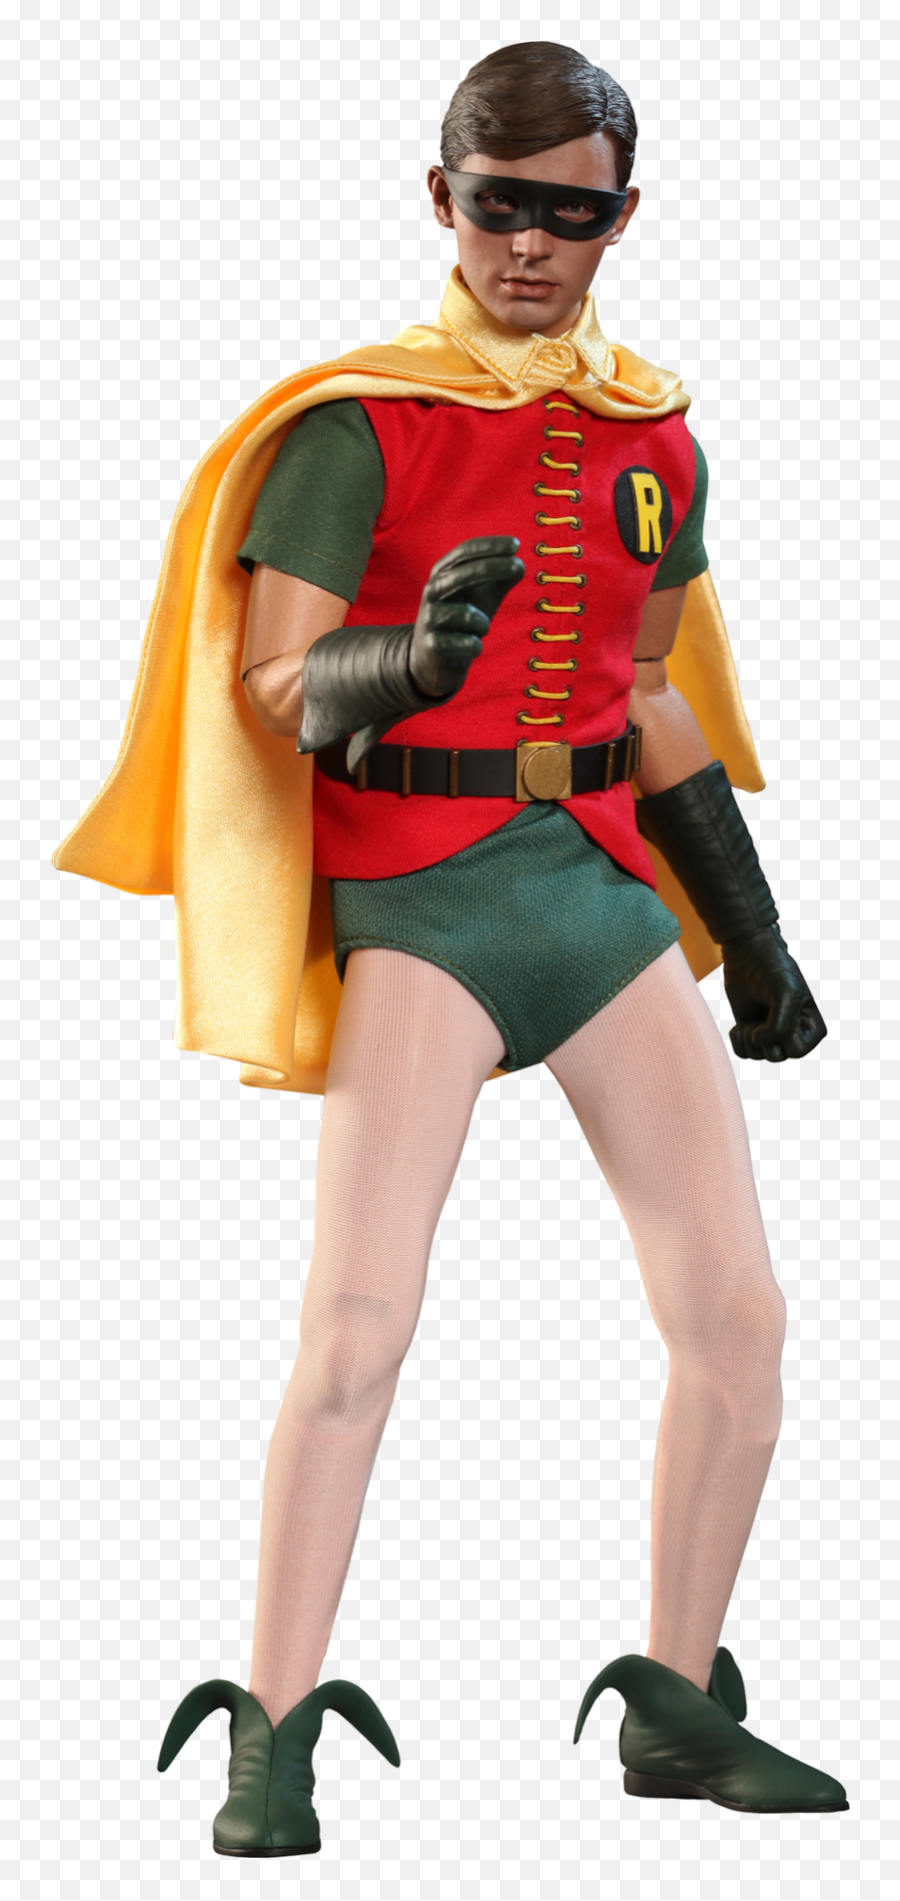 Download Free Png Sid902080 - Robin 1966,Robin Png